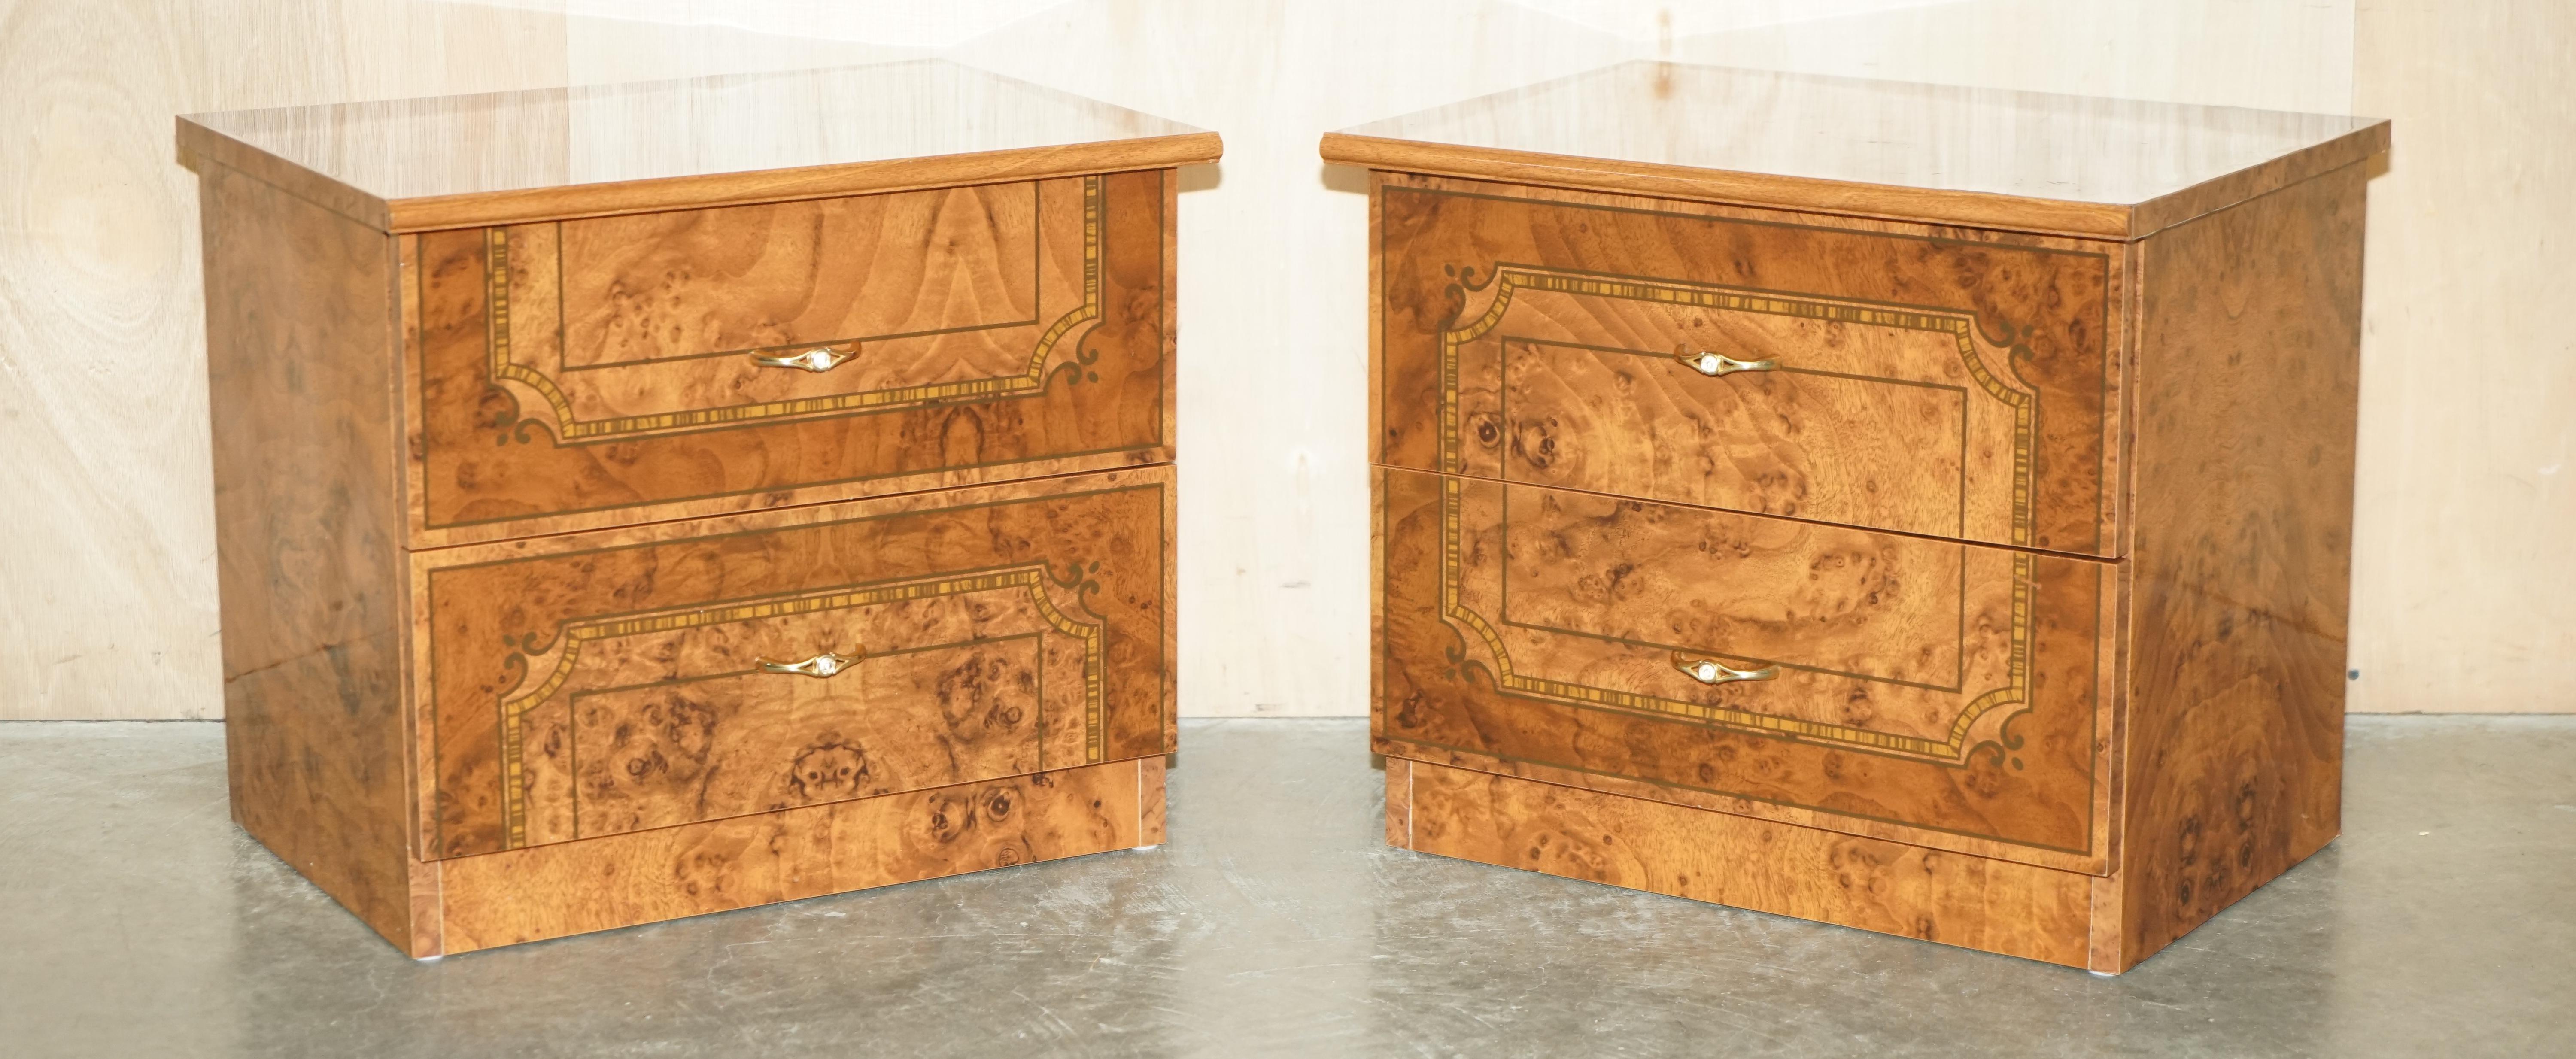 Royal House Antiques

Royal House Antiques is delighted to offer for sale this vintage made in Italy pair of Burr Walnut veneer bedside tables or nightstands 

Please note the delivery fee listed is just a guide, it covers within the M25 only for